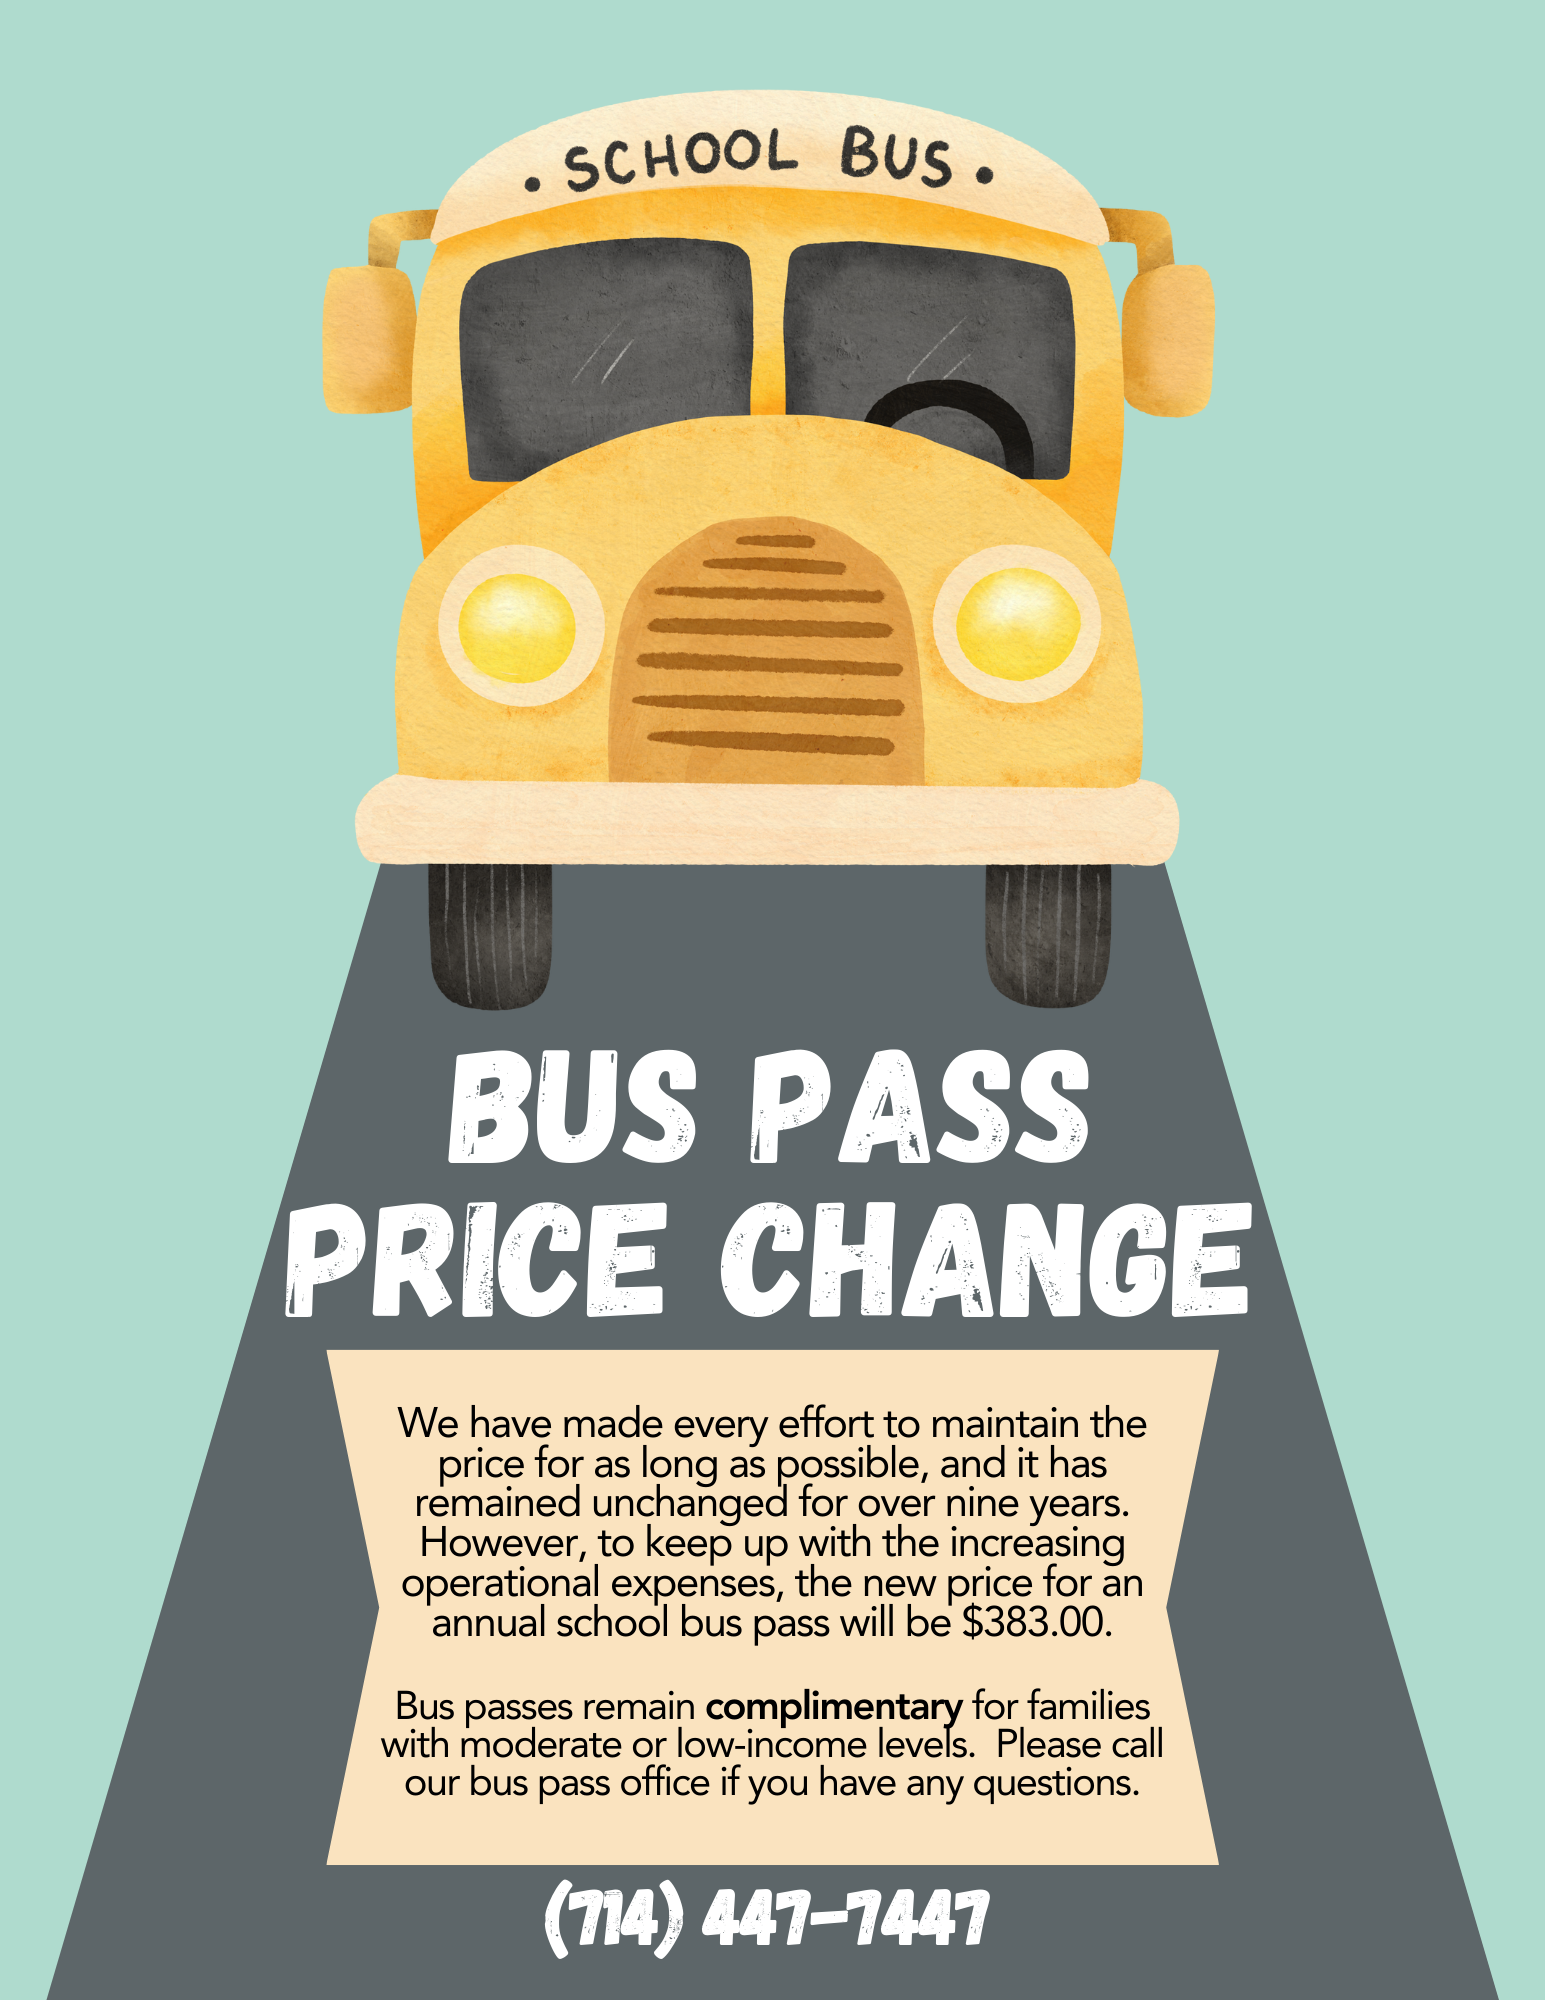 Annual Bus Pass price is now $383. The last increase was in 2015. Passes will remain free for moderate or low-income students